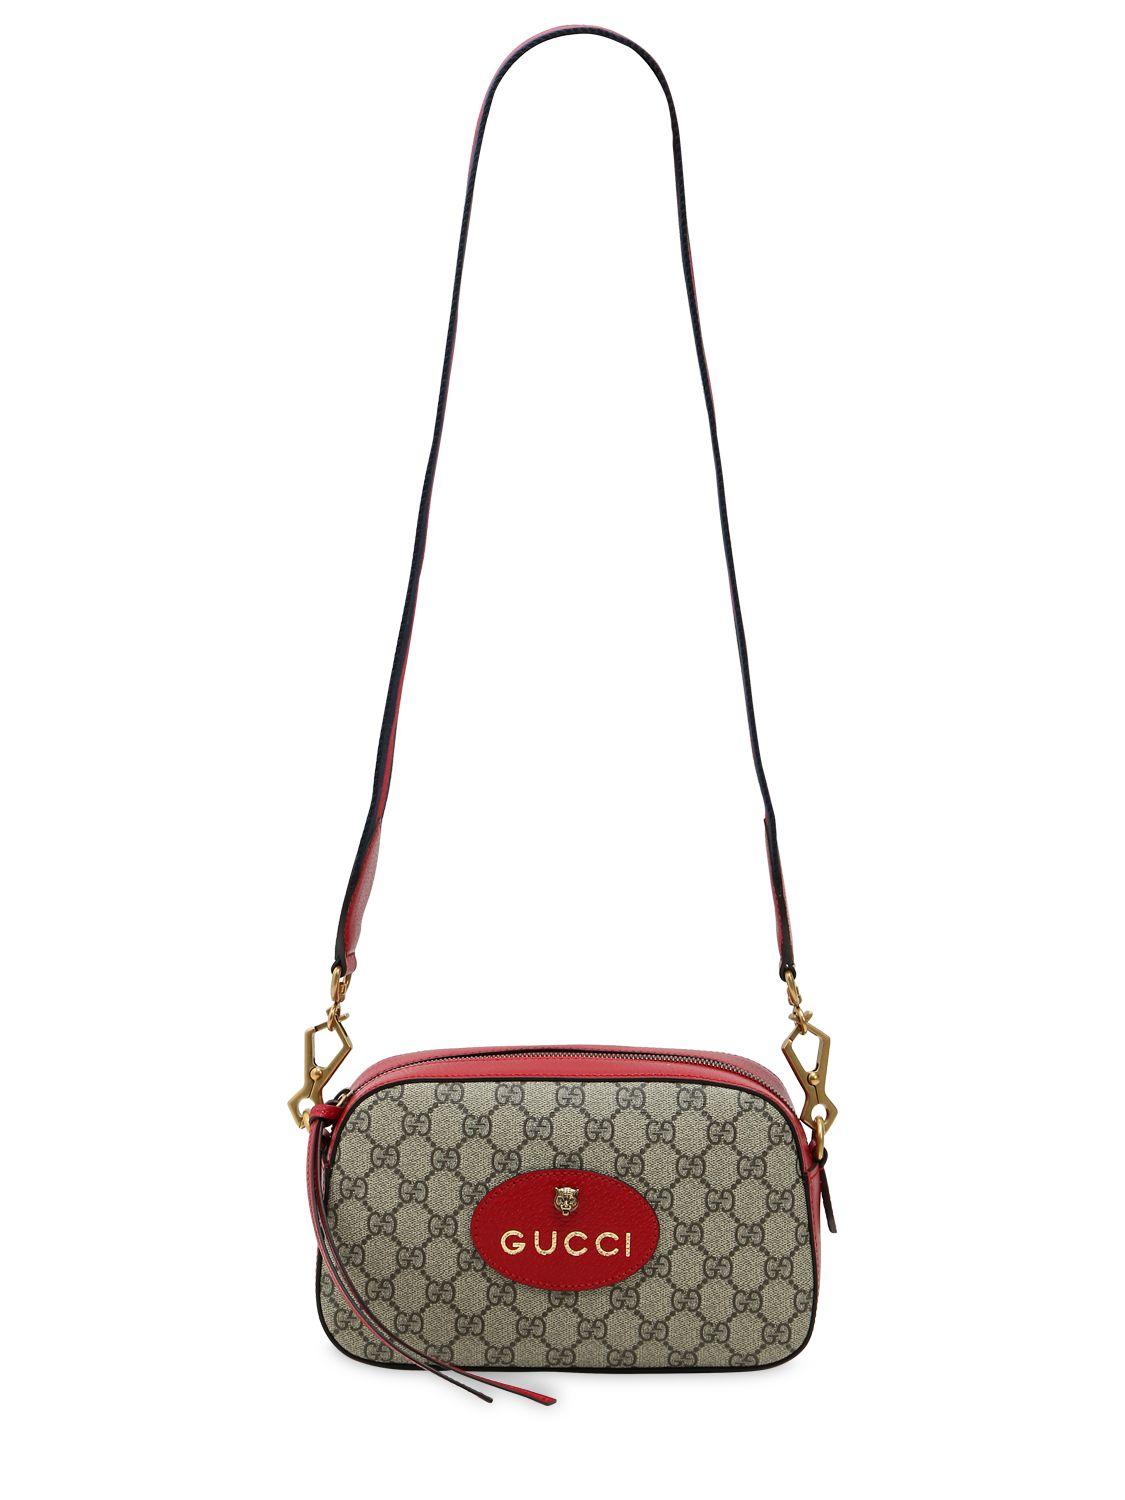 GUCCI Vintage 80s GG Supreme Web Canvas Navy Red Small Crossbody